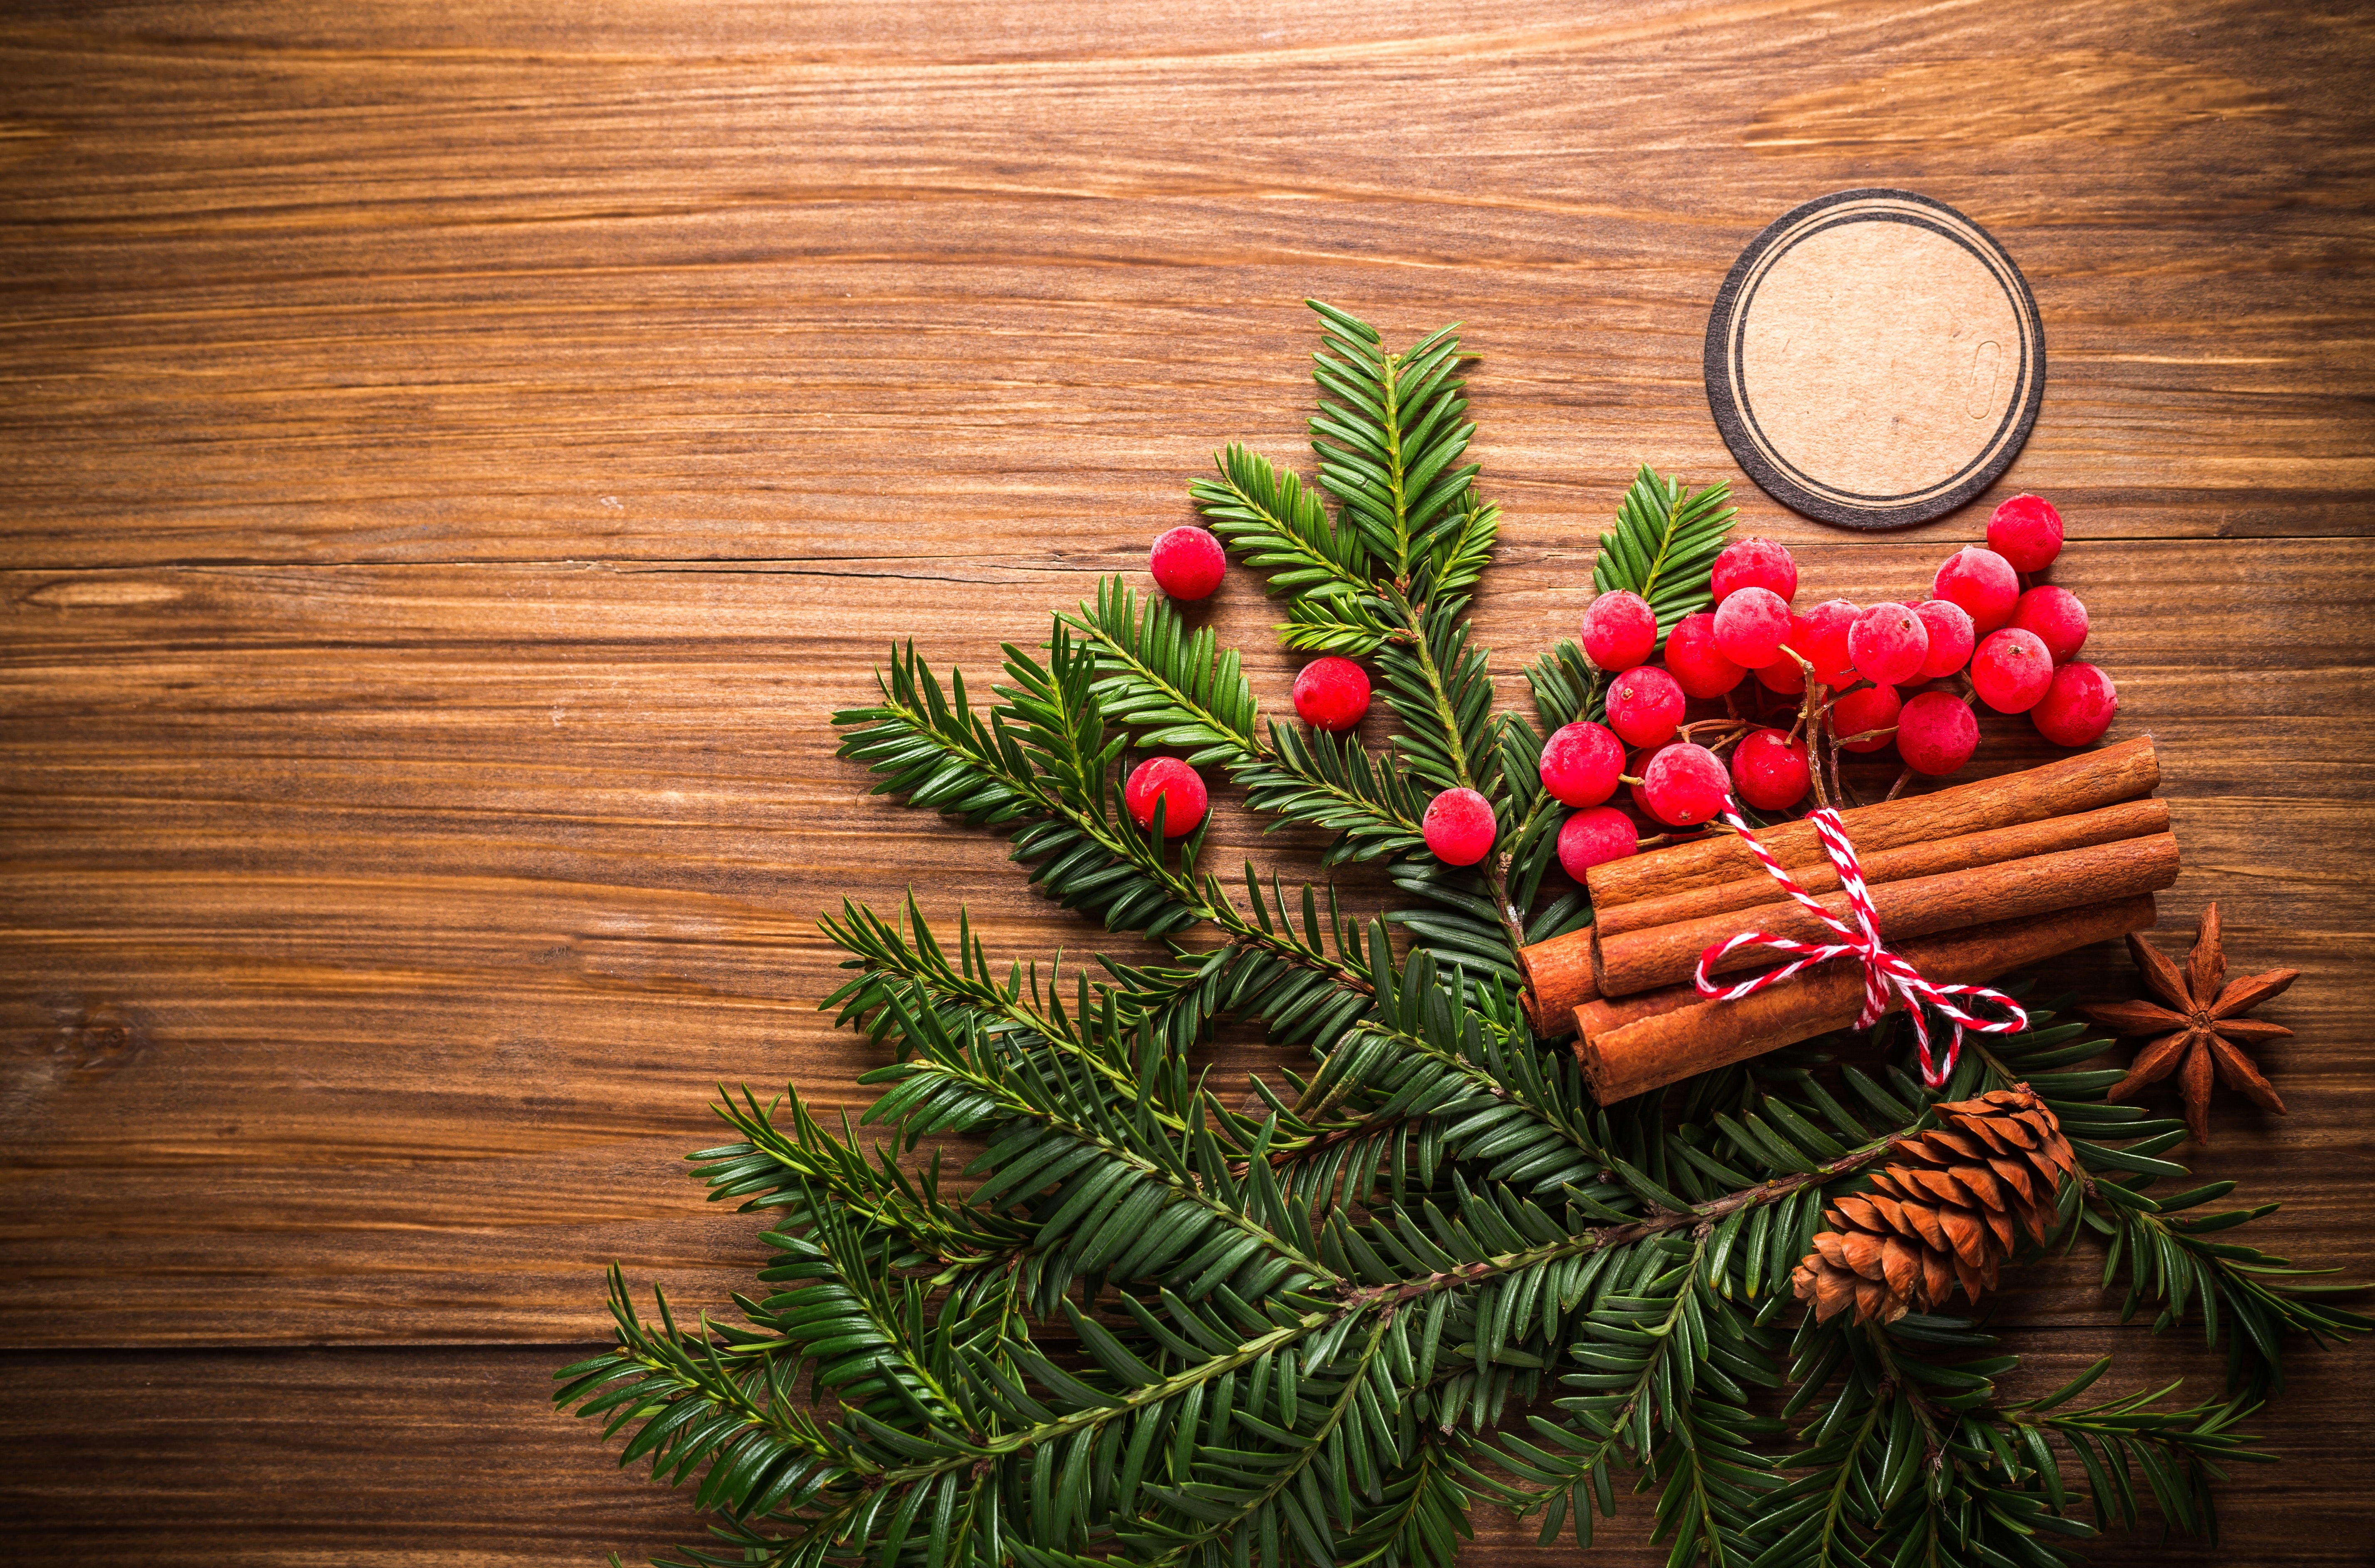 Stock image from Pexels of Christmas accessories on wood surface.